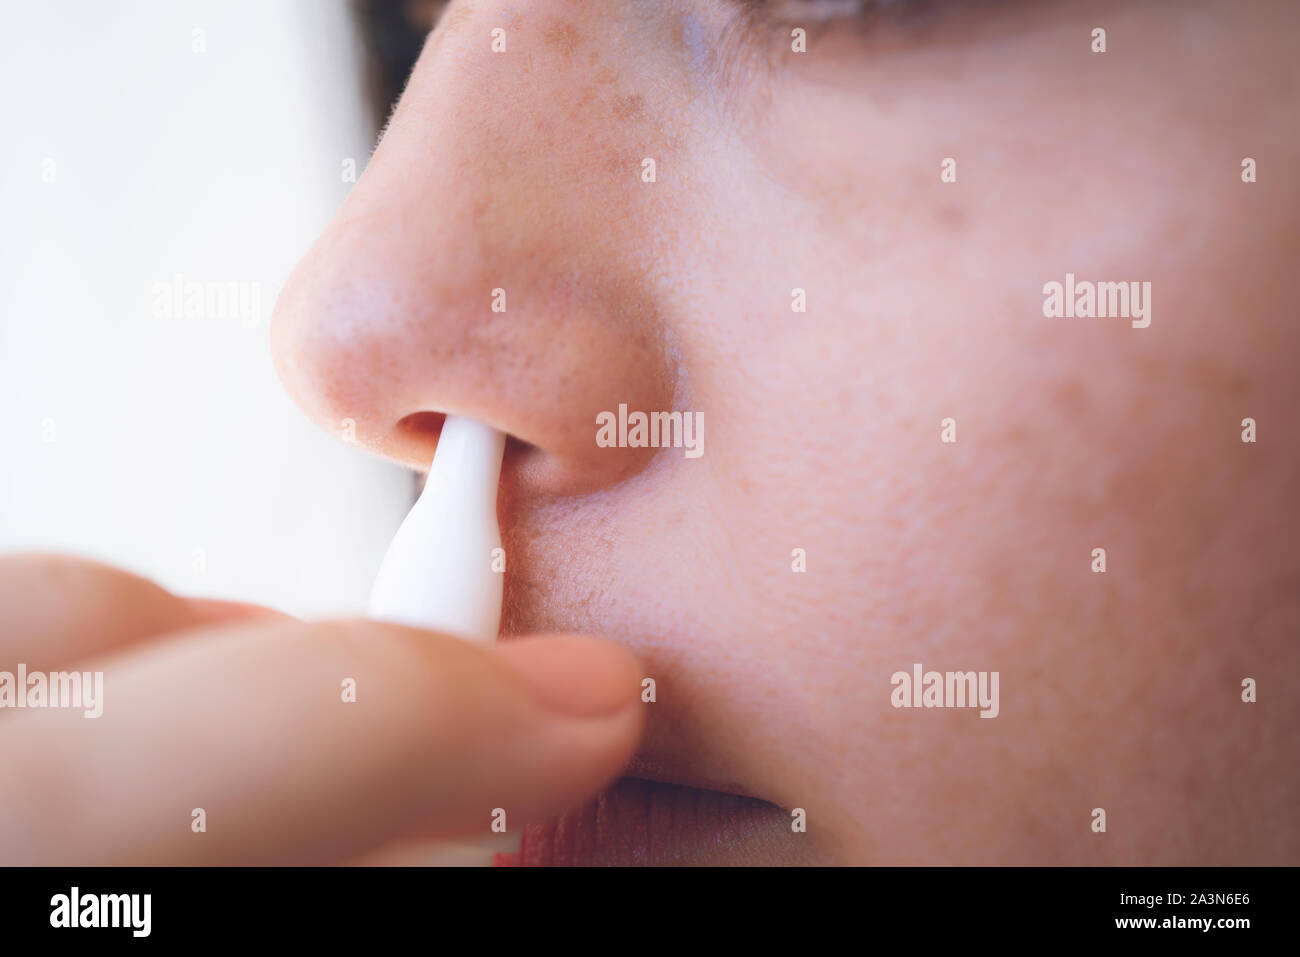 Nasal Spray. Closeup Of Beautiful Young Woman's Face With Nasal Drops. Close-up Of Female Spraying Medical Nasal Spray In Her Nose. Cold And Flu, Heal Stock Photo